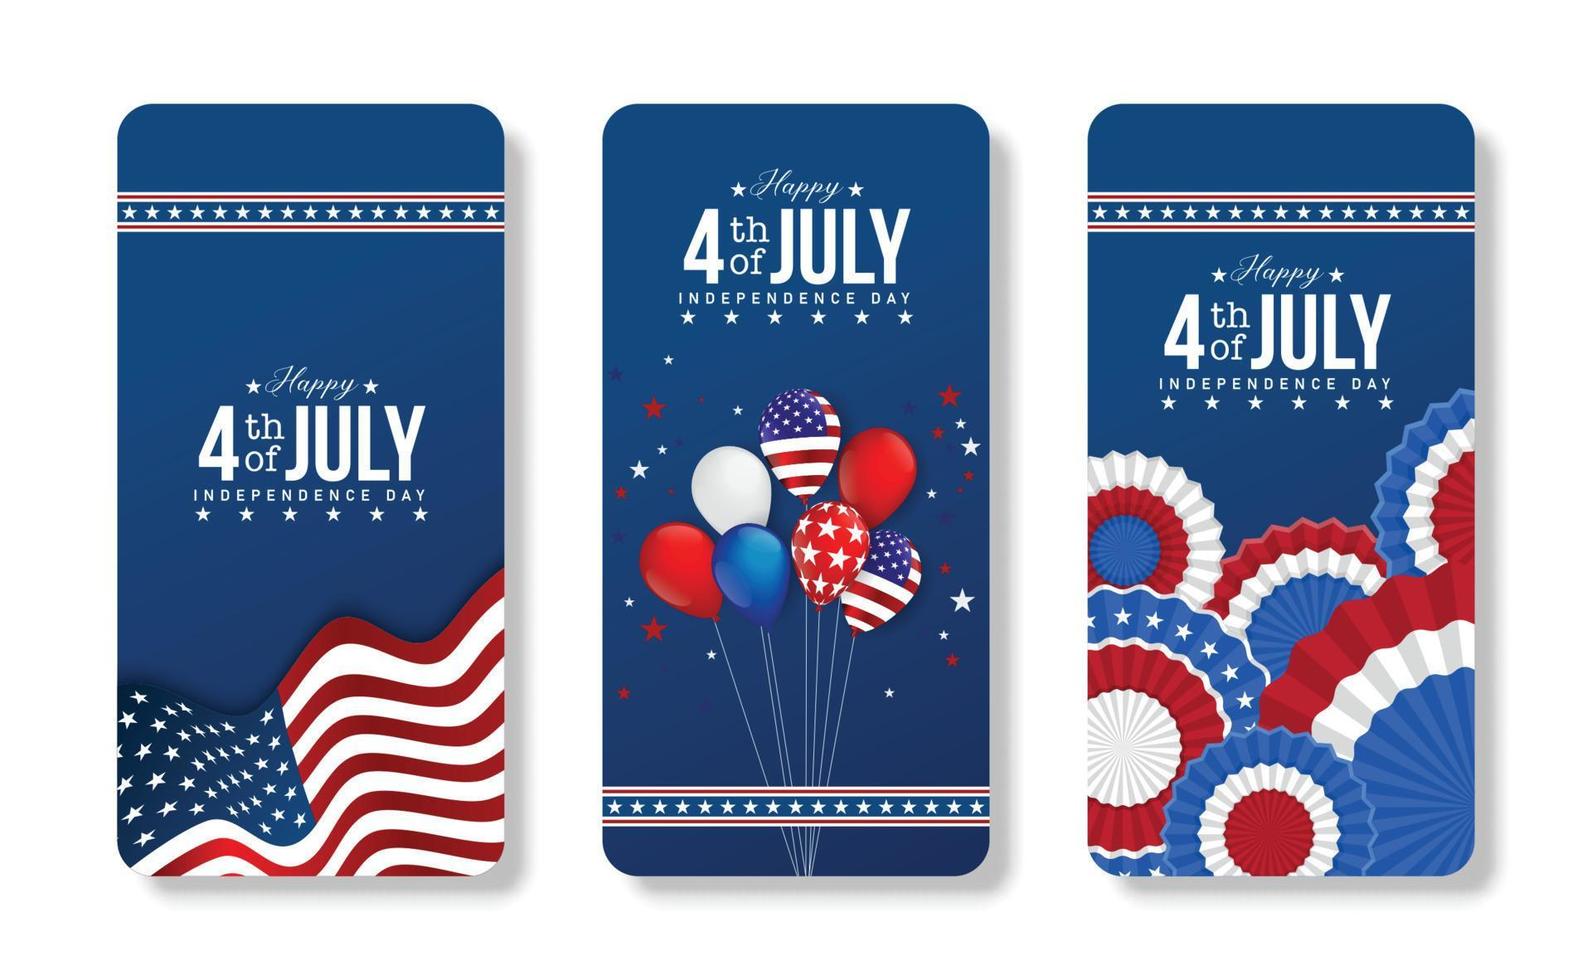 Mobile phone american flag illustration for america united states national day 4th july with blue background vector